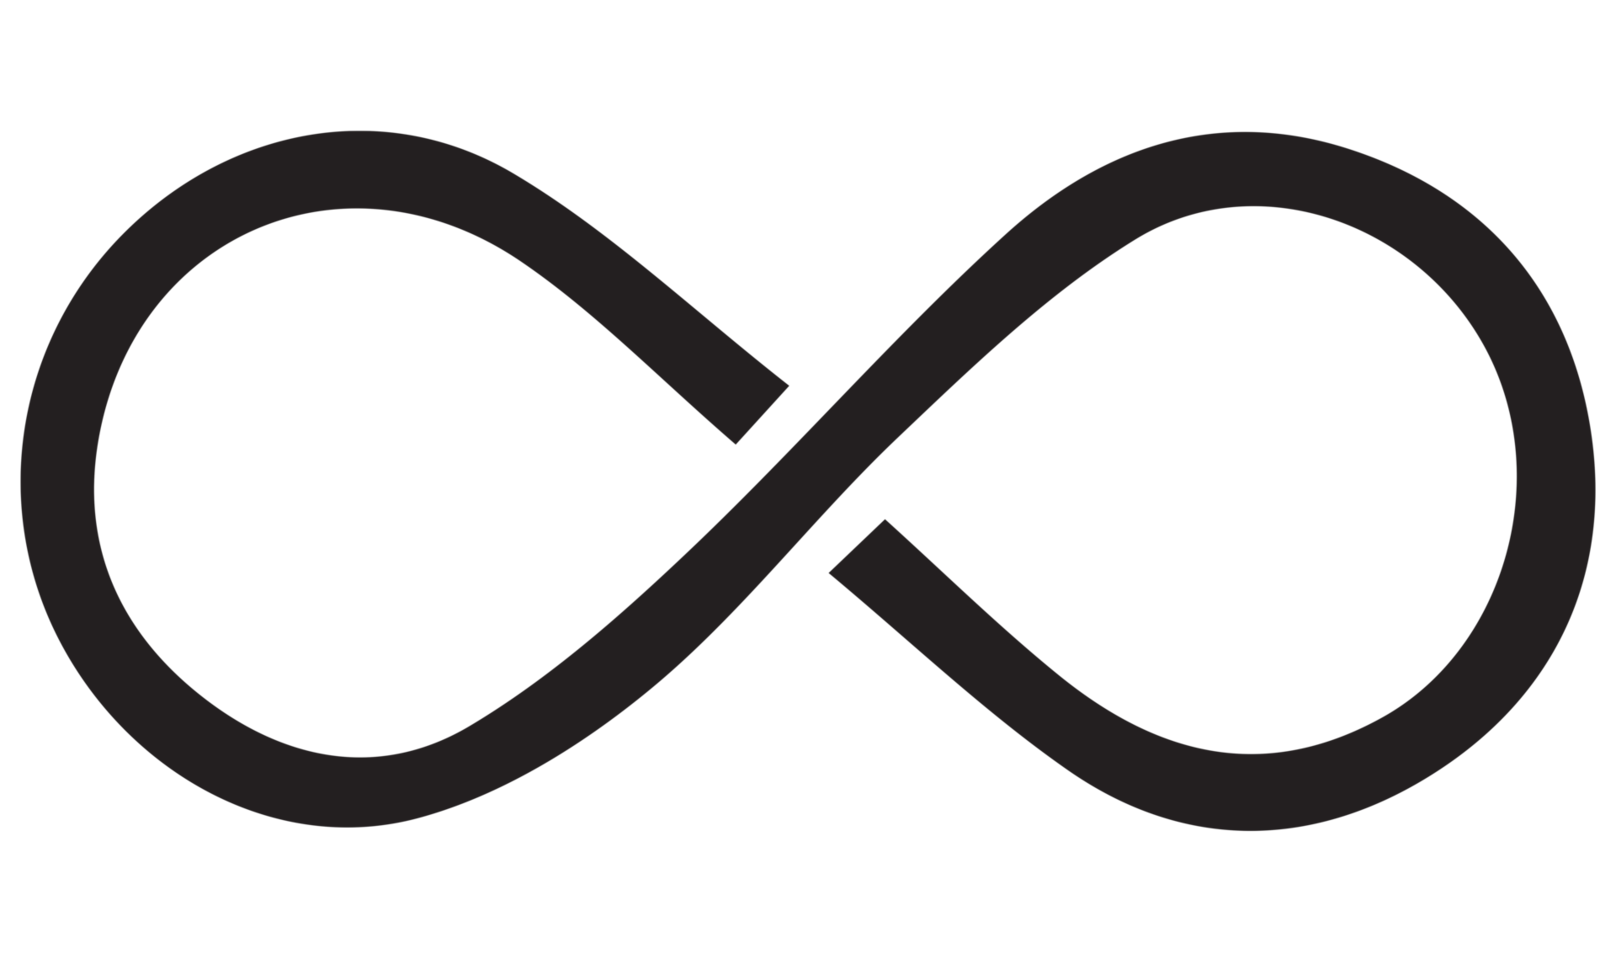 https://static.vecteezy.com/system/resources/previews/019/787/033/non_2x/infinity-symbol-black-on-transparent-background-free-png.png